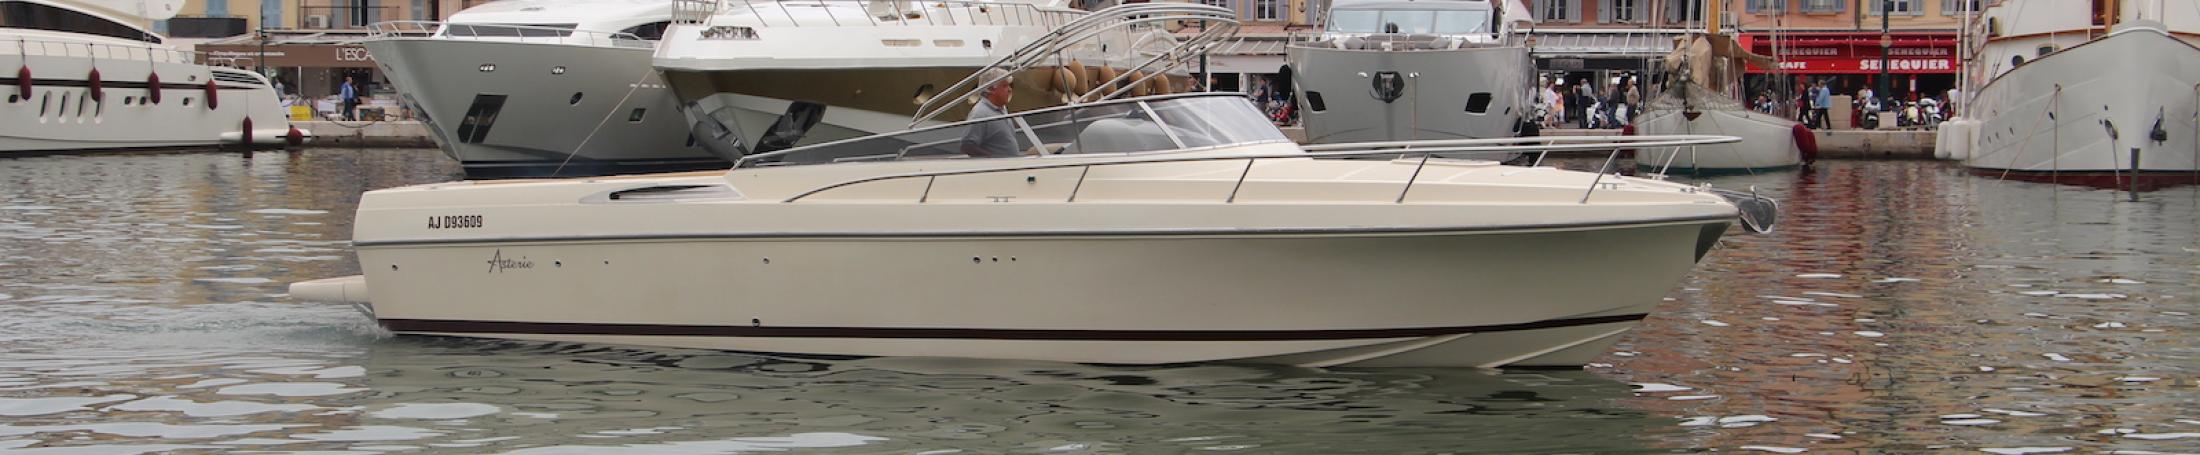 ASTERIE 40' DAY CRUISER